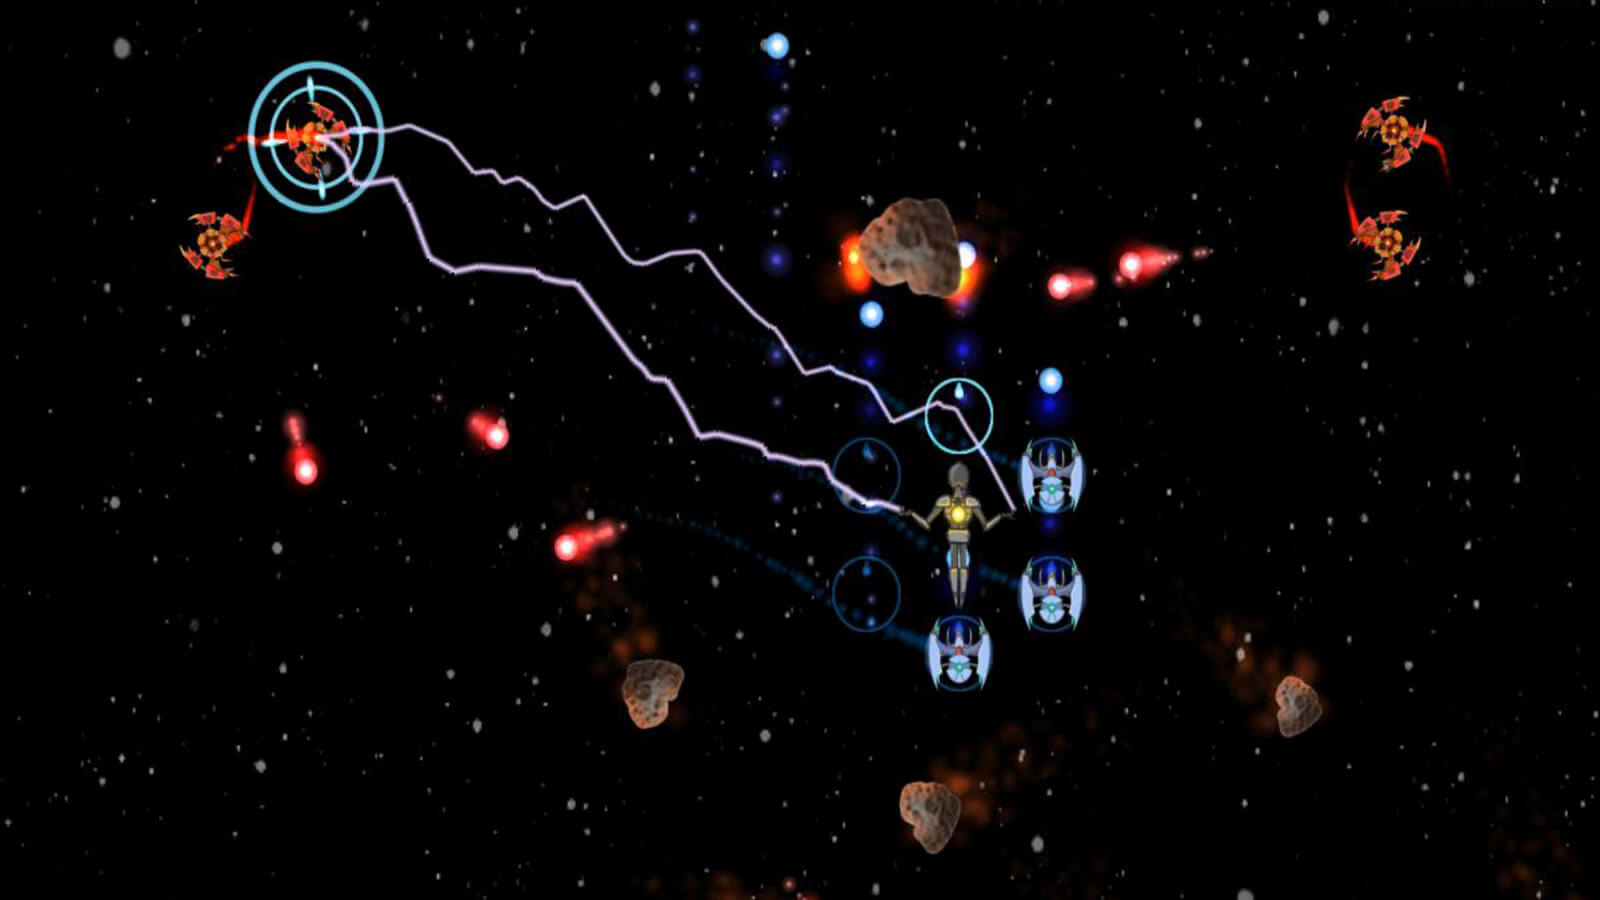 A humanoid controlling three ships zaps a red enemy ship as asteroids float by.